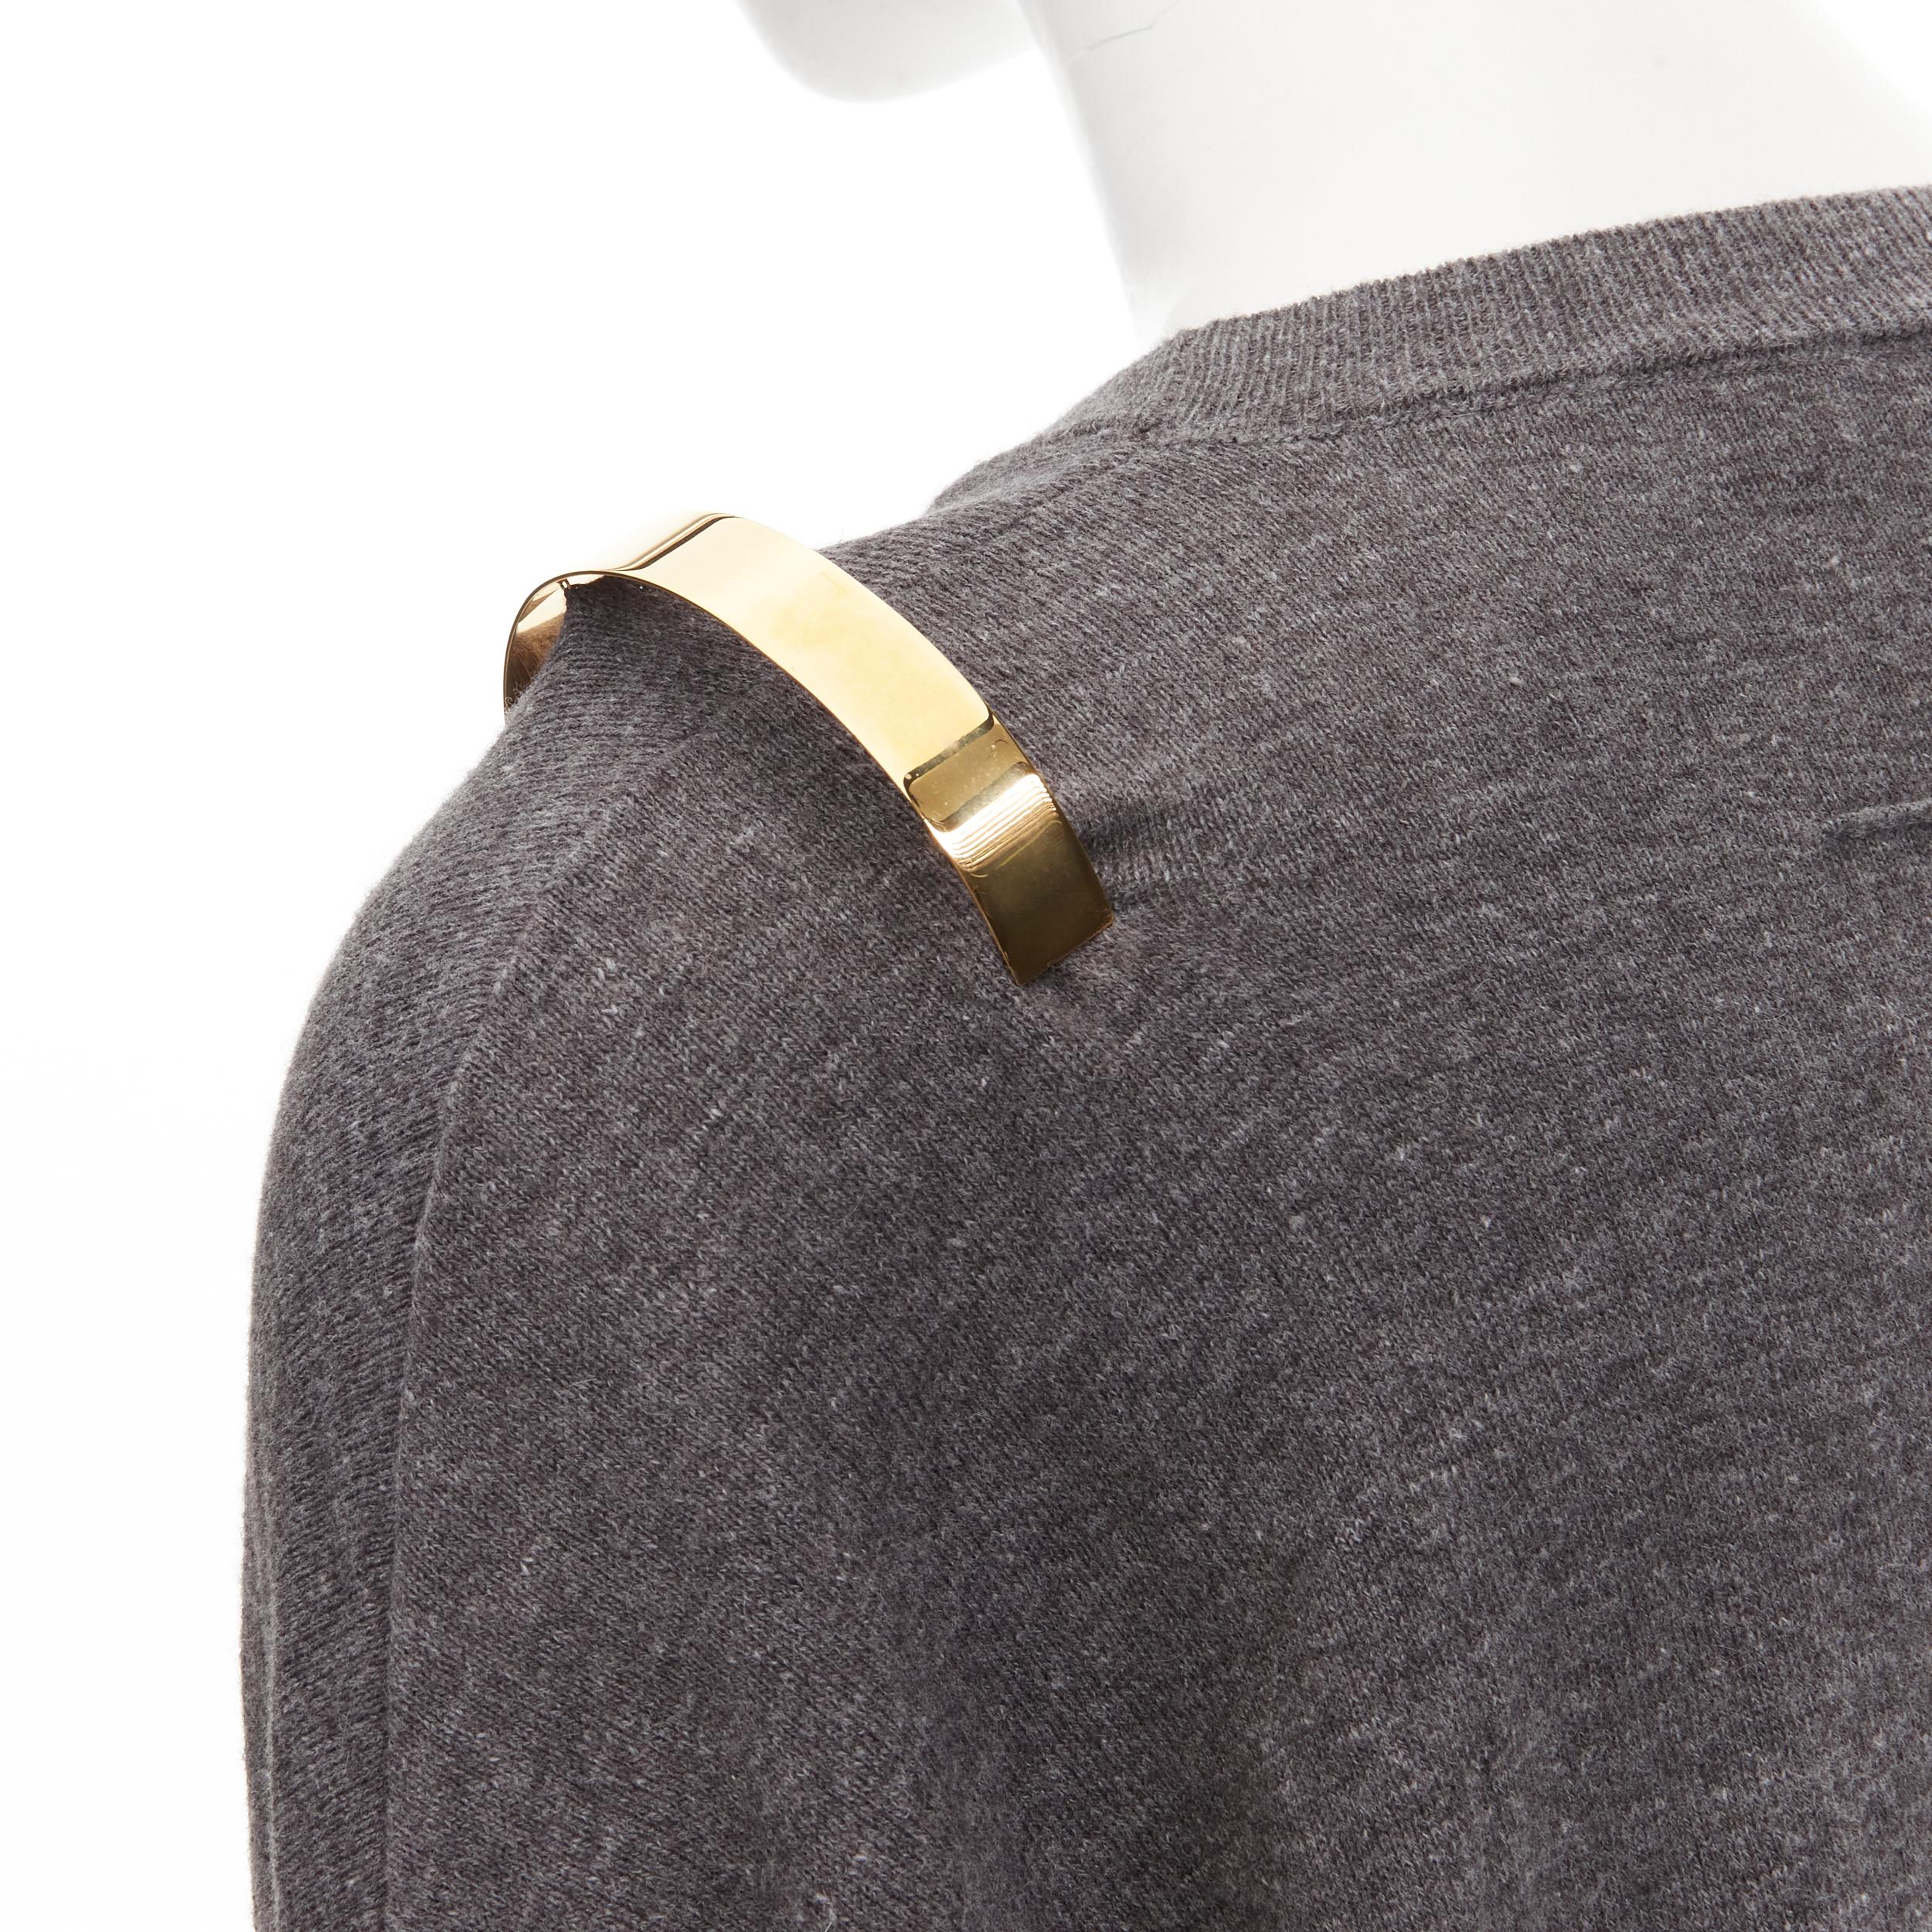 GIVENCHY Riccardo Tisci gold metal shoulder bar cuff grey wool alpaca sweater S
Reference: YNWG/A00150
Brand: Givenchy
Designer: Riccardo Tisci
Material: Wool, Alpaca, Cotton
Color: Grey, Gold
Pattern: Solid
Closure: Pullover
Made in: